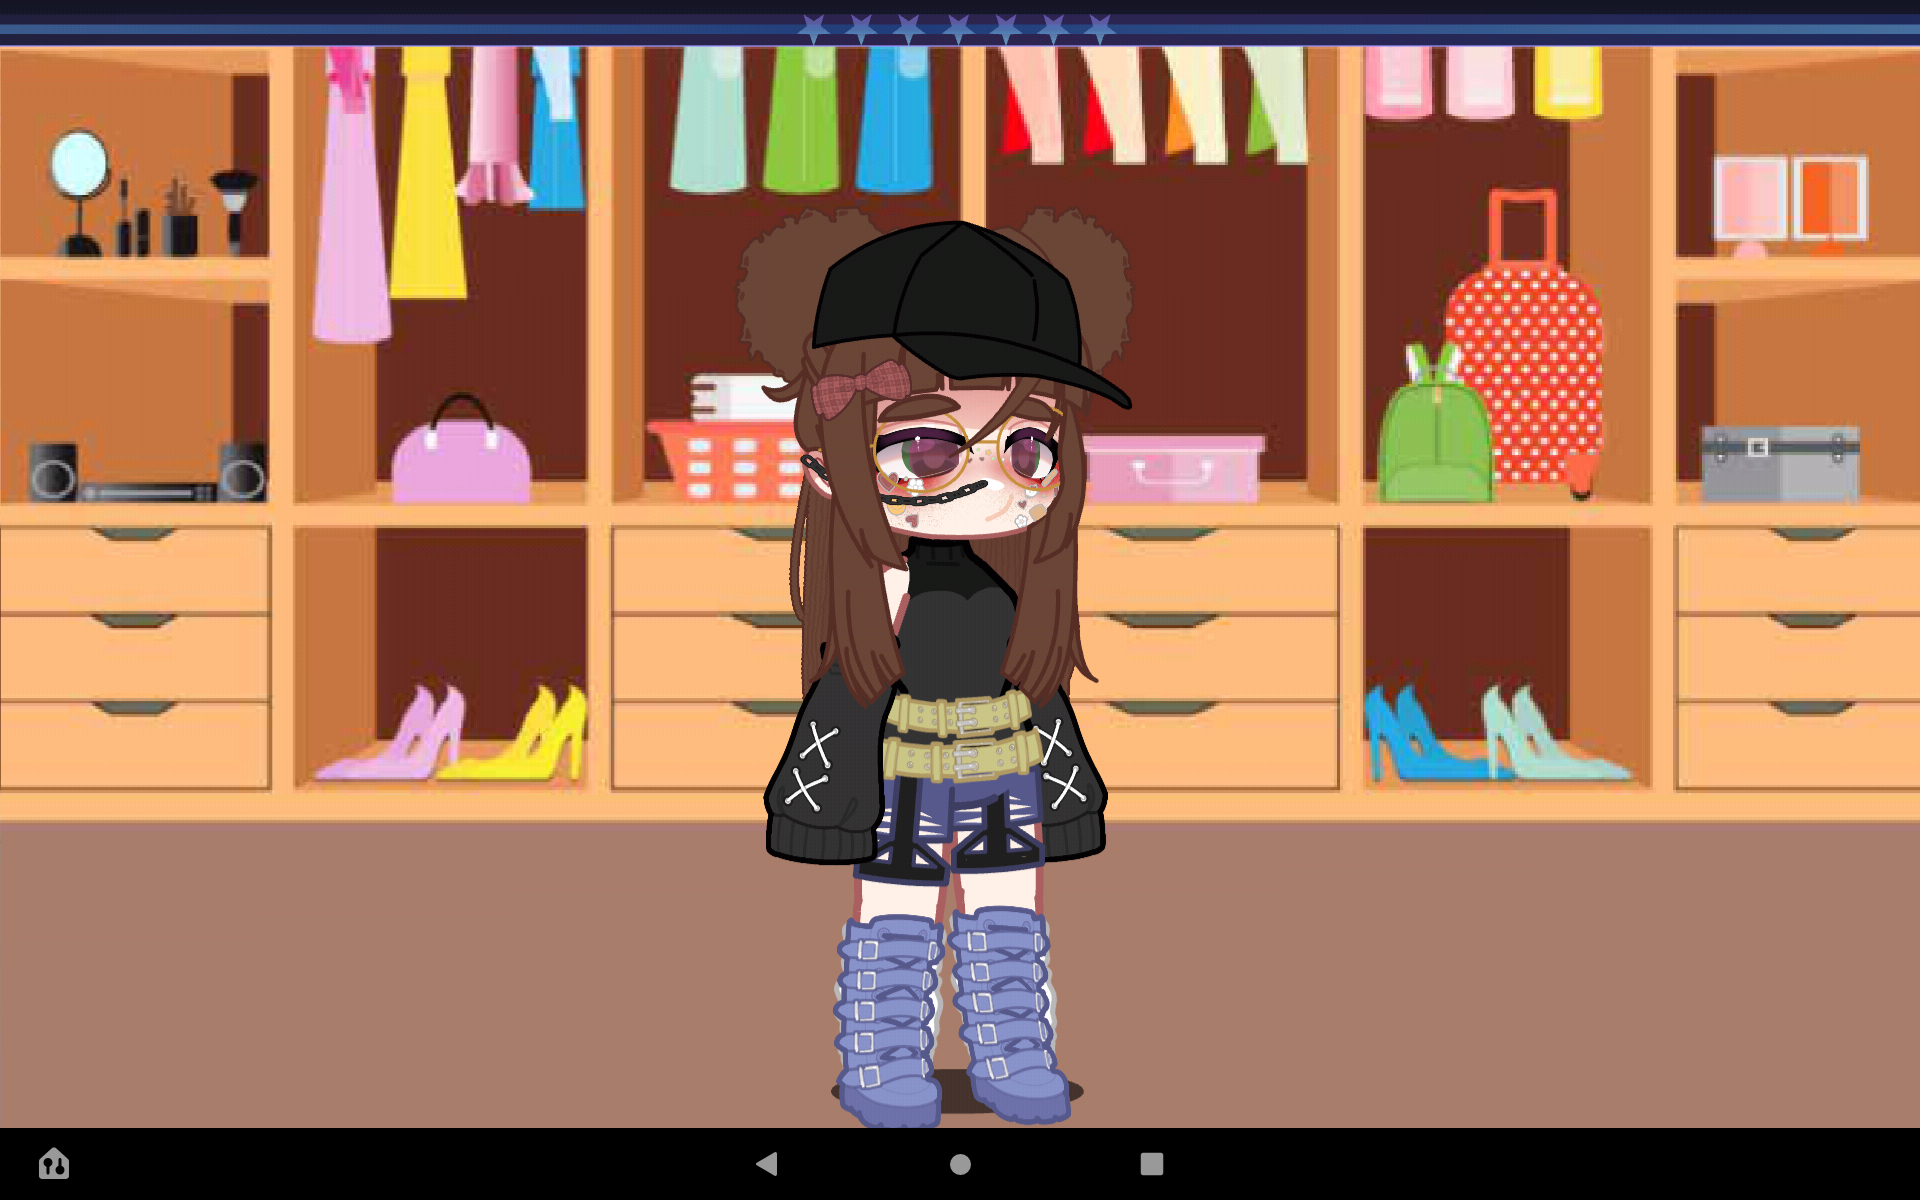 Download Gacha Universal Outfits android on PC